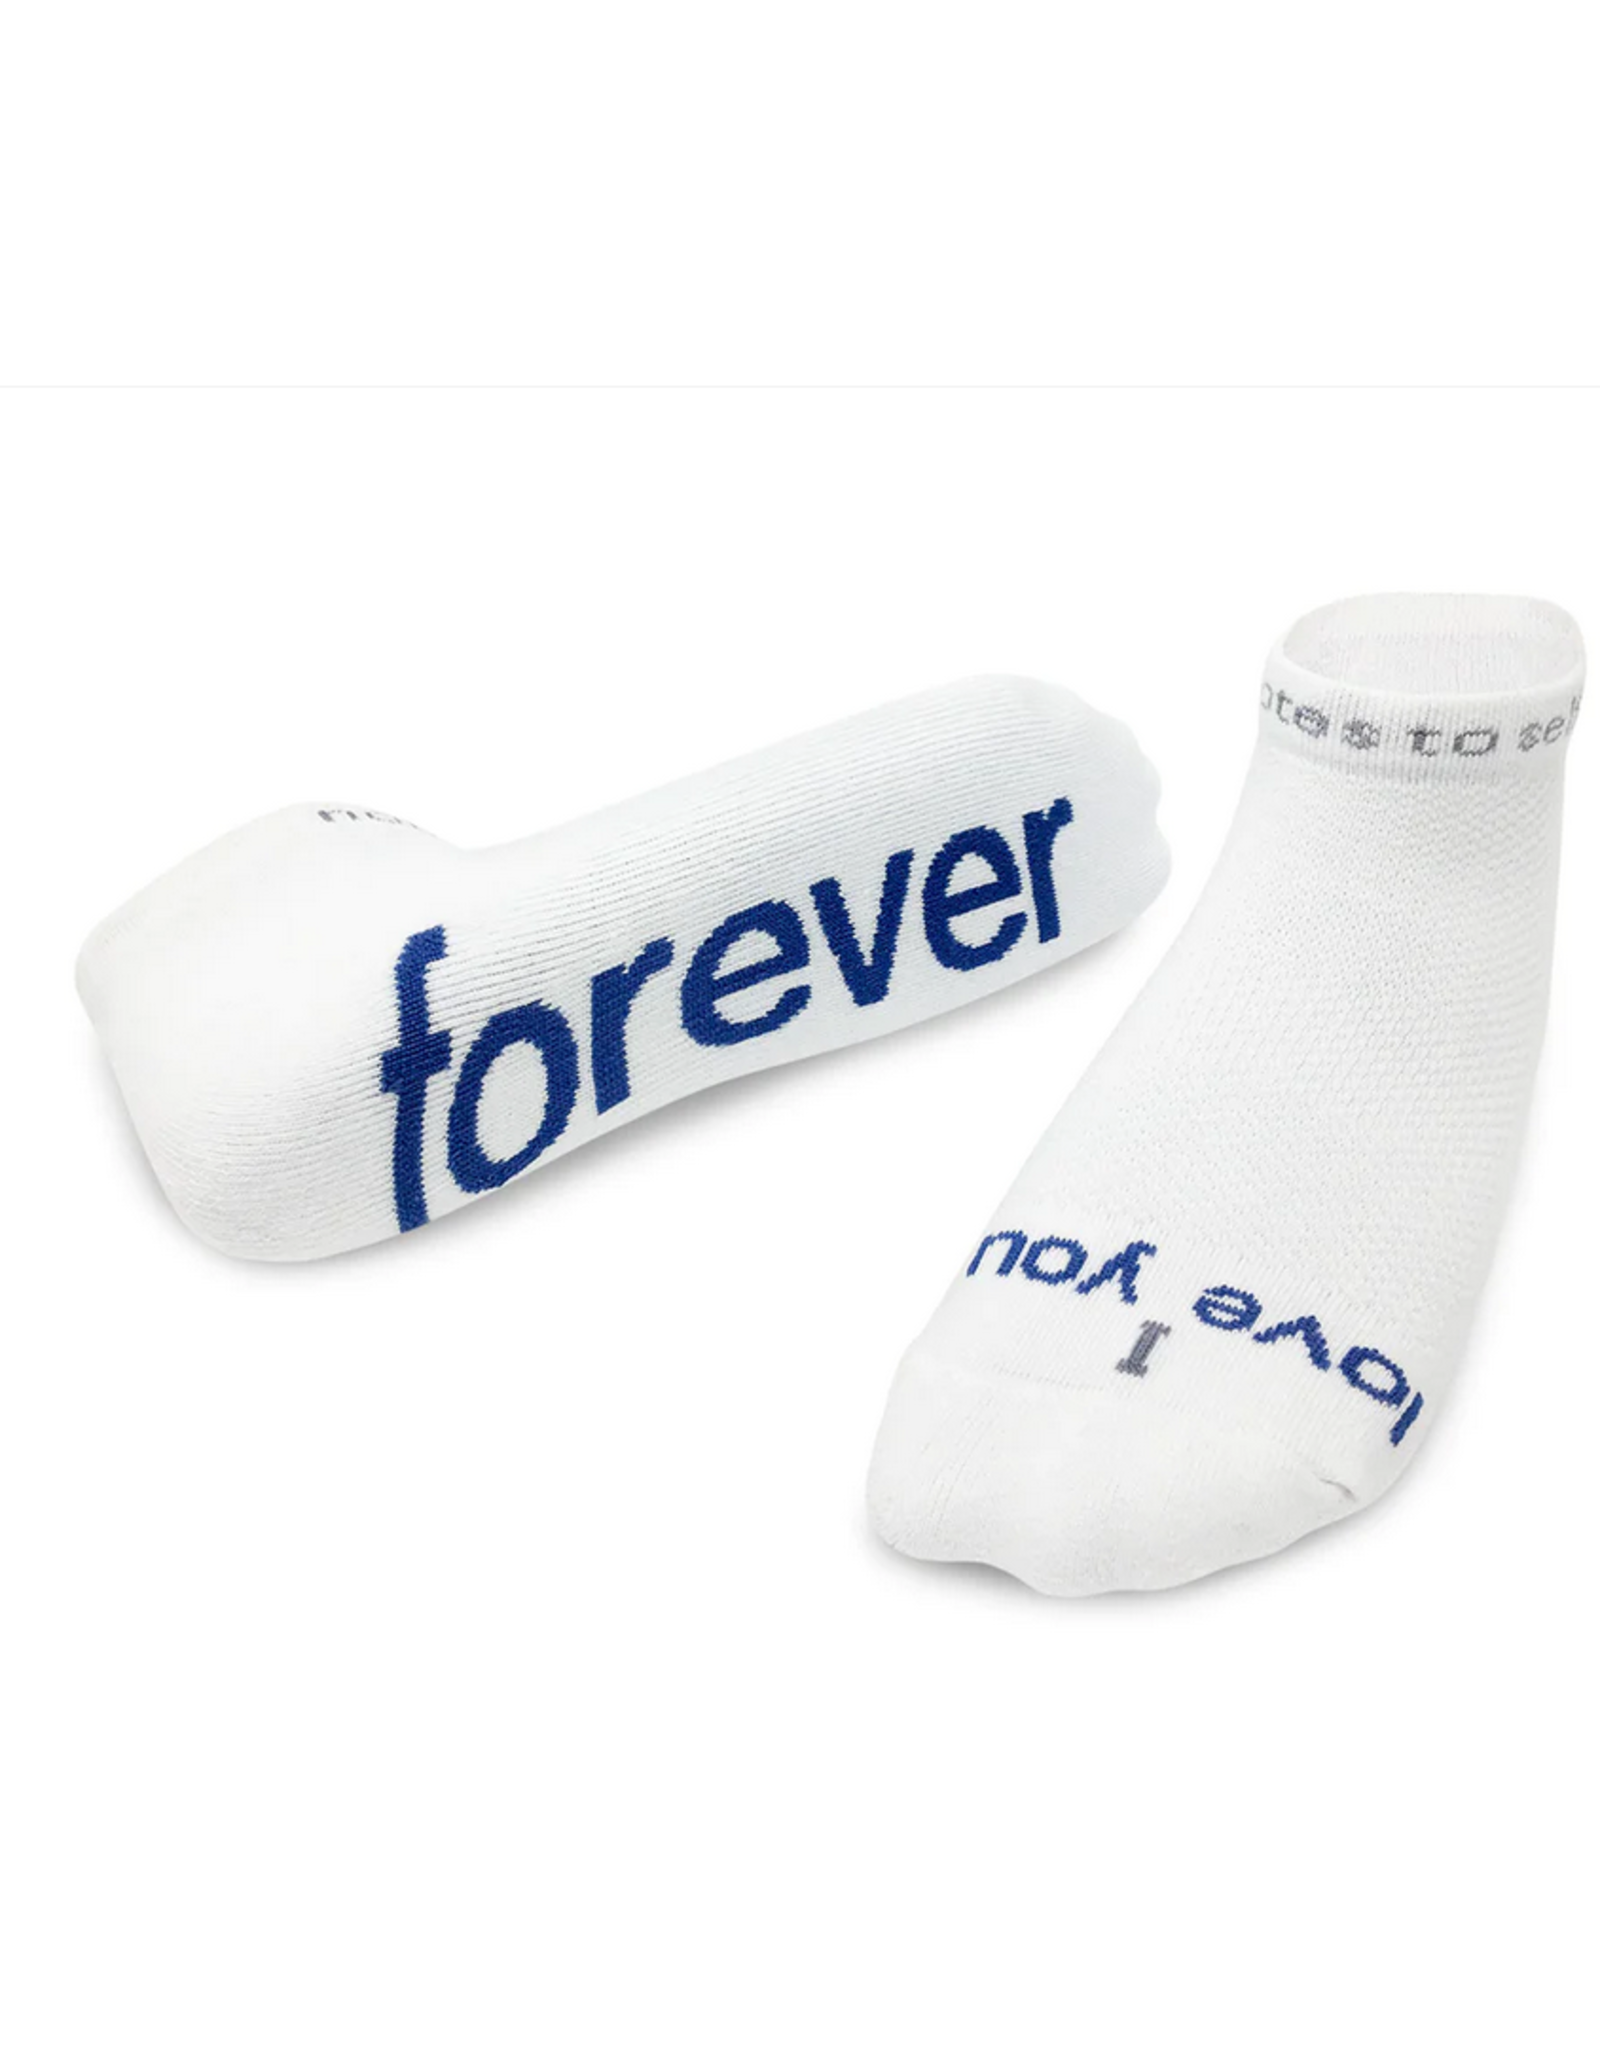 notes to self Notes to Self Forever 'I Love You' Low-Cut Socks